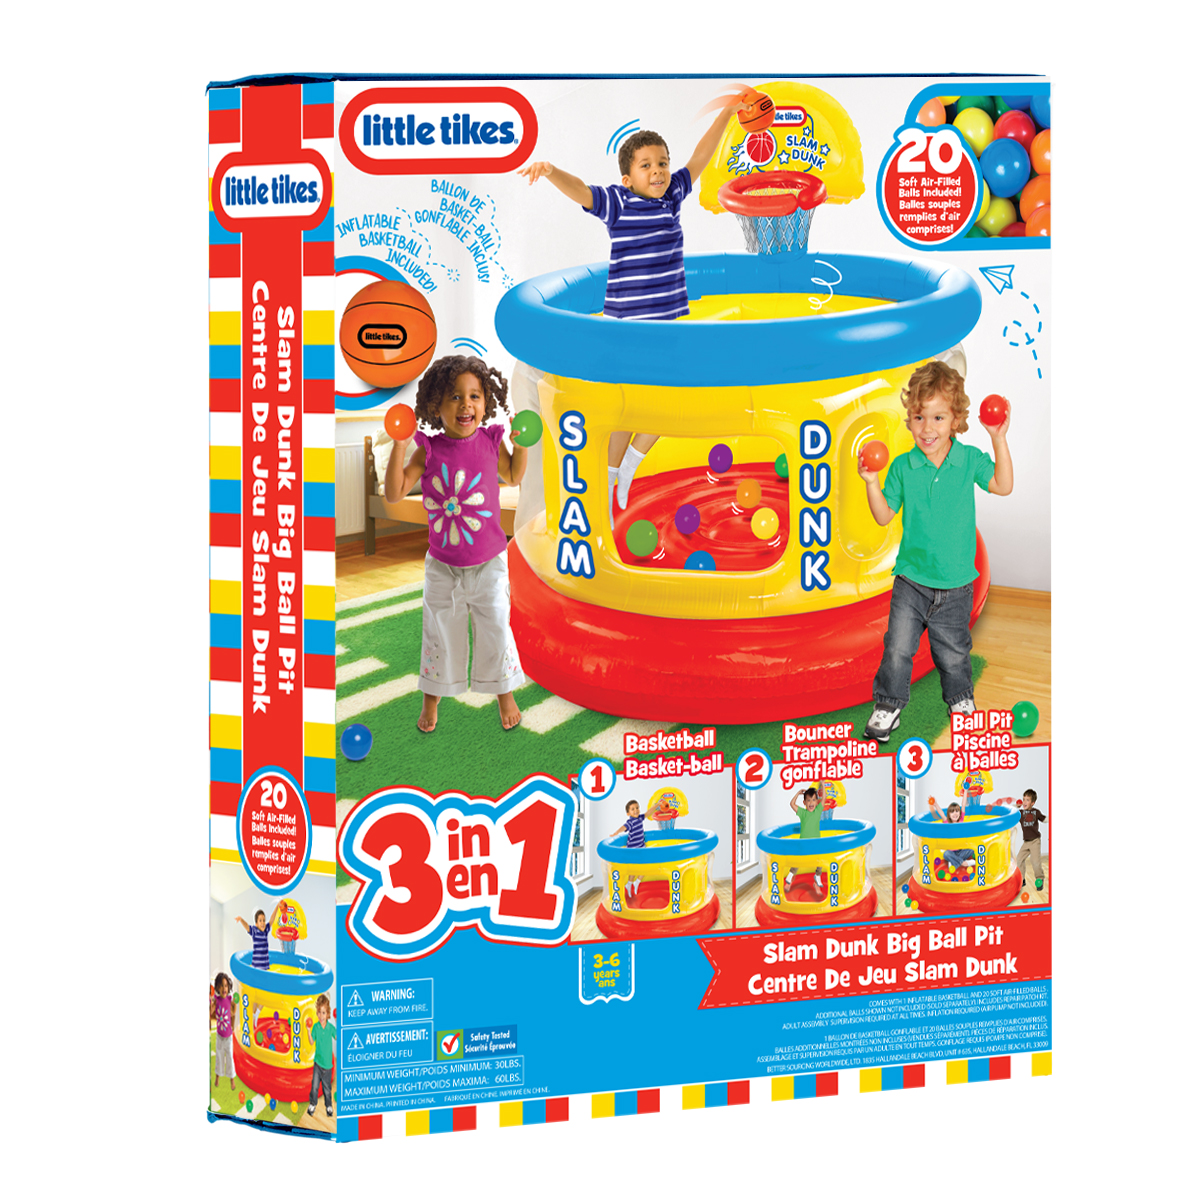 Little Tikes Slam Dunk Big Ball Pit, Inflatable Basketball Hoop and Balls for Kids Ages 3-6 - image 6 of 6